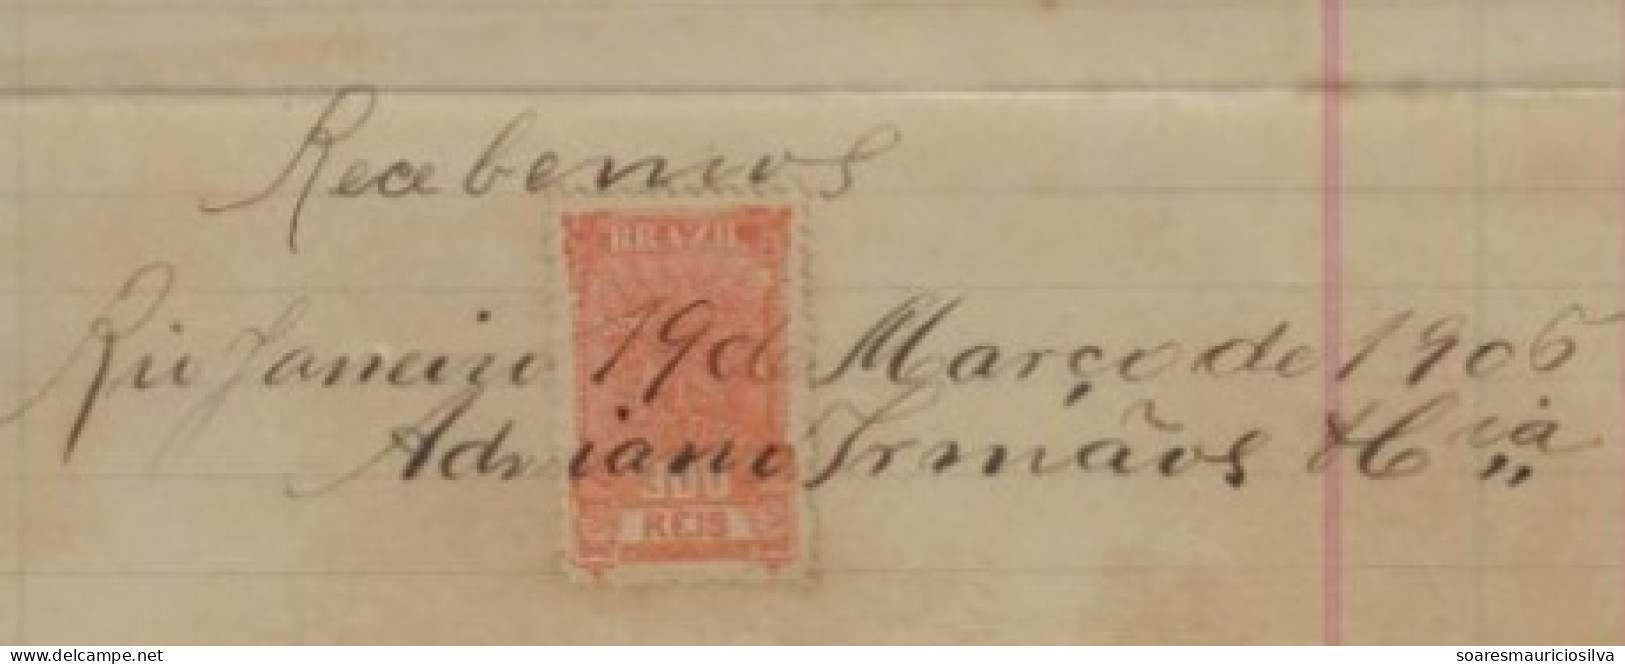 Brazil 1906 Invoice Factory Brushes Dustpans Broomsby Adriano Brothers &Co Rio De Janeiro Federal Treasury Tax Stamp 300 - Brieven En Documenten